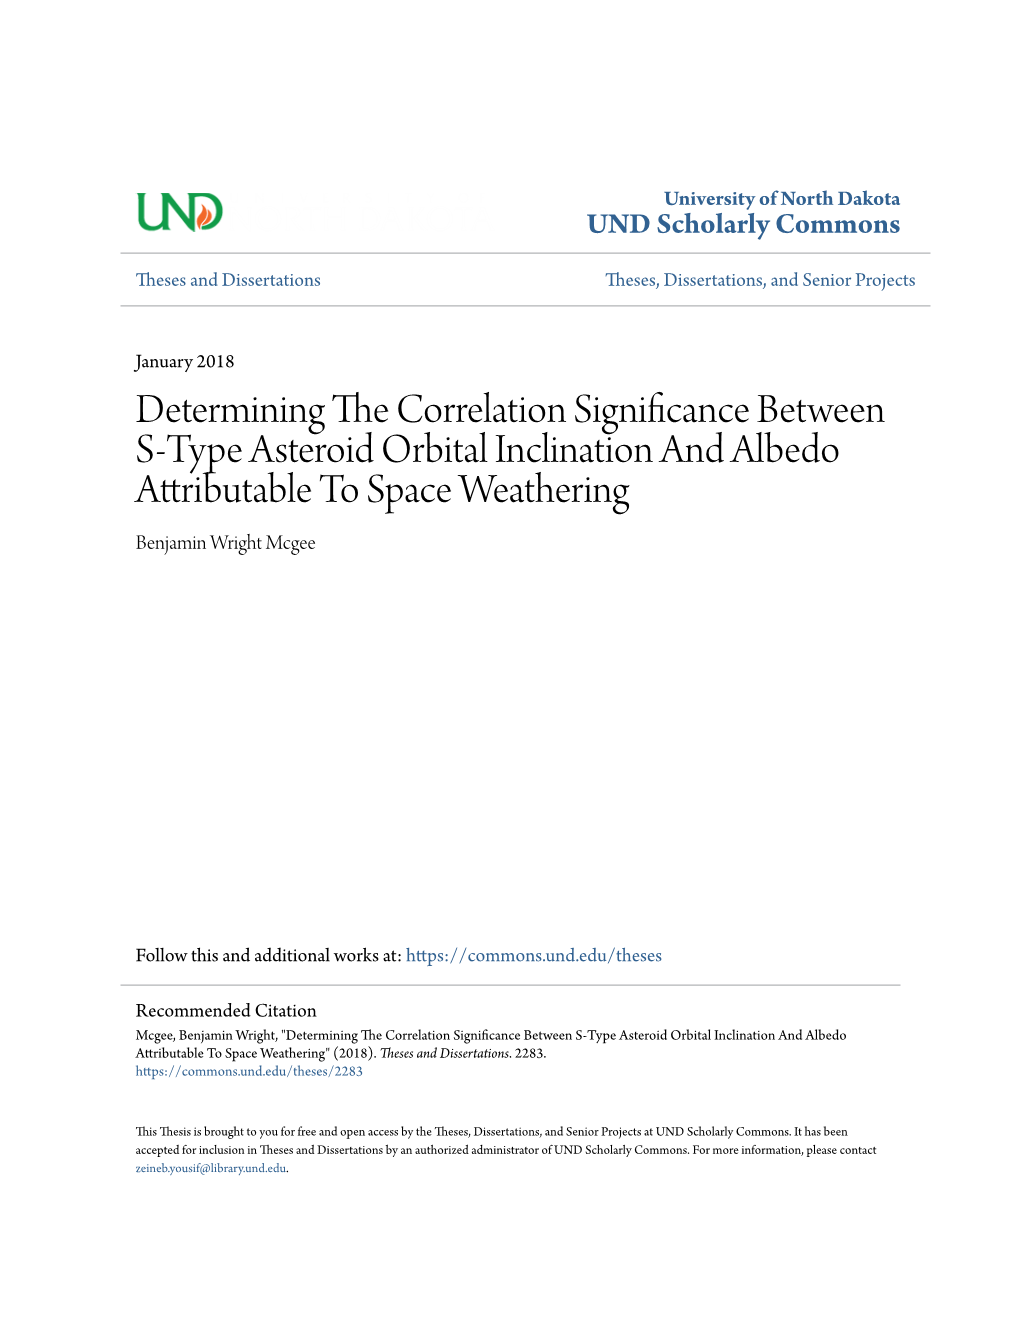 Determining the Correlation Significance Between S-Type Asteroid Orbital Inclination and Albedo Attributable to Space Weathering